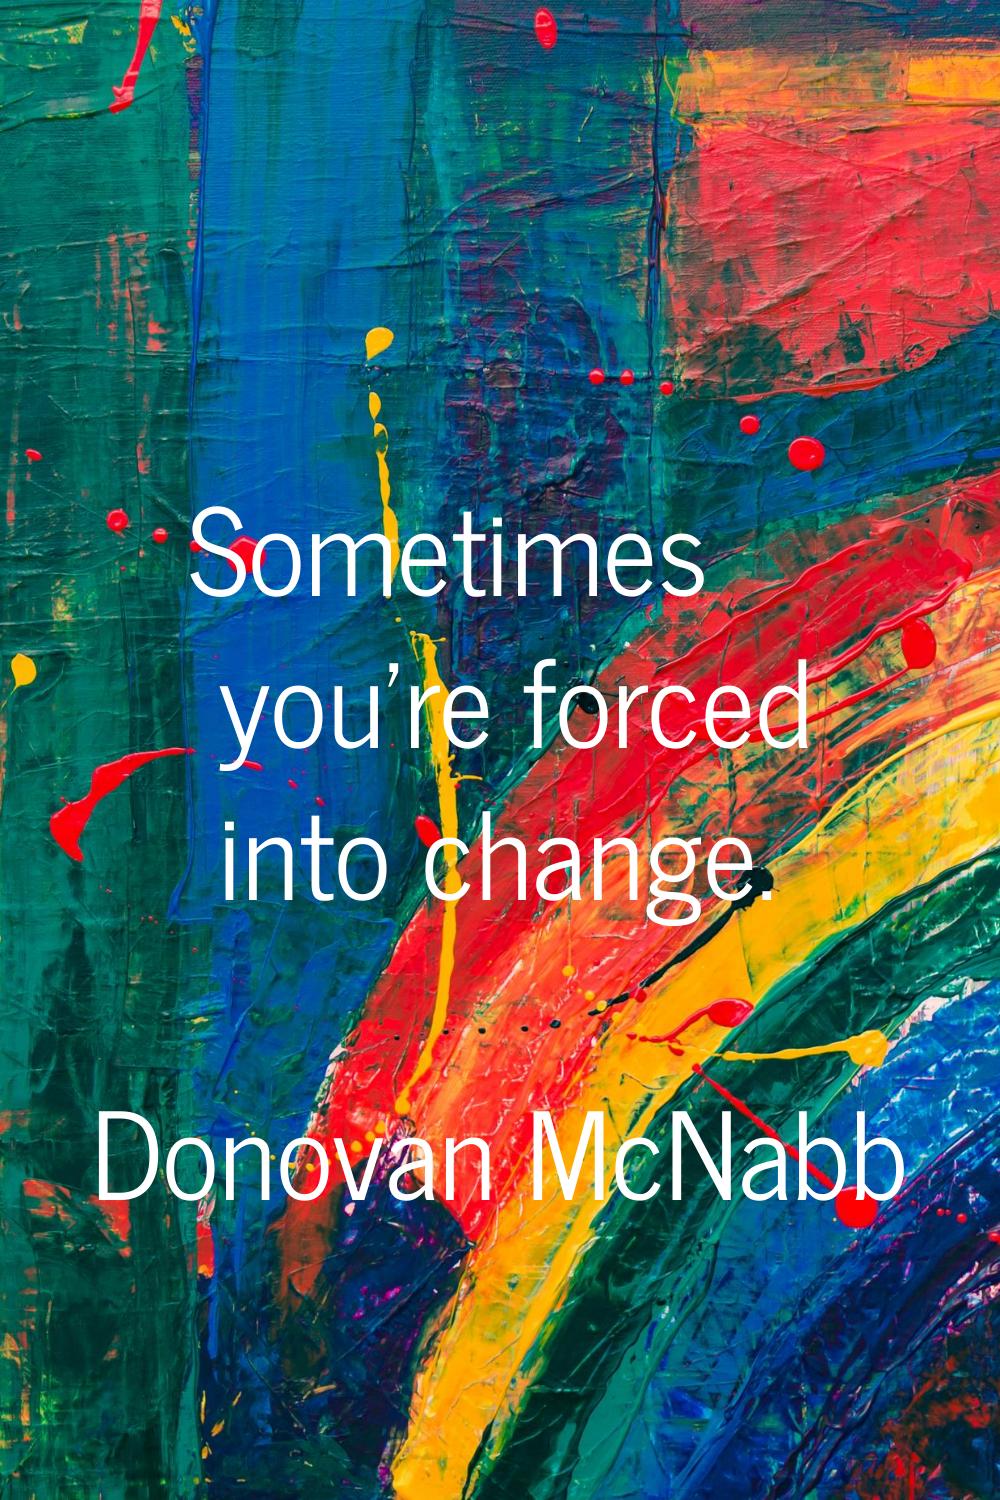 Sometimes you're forced into change.